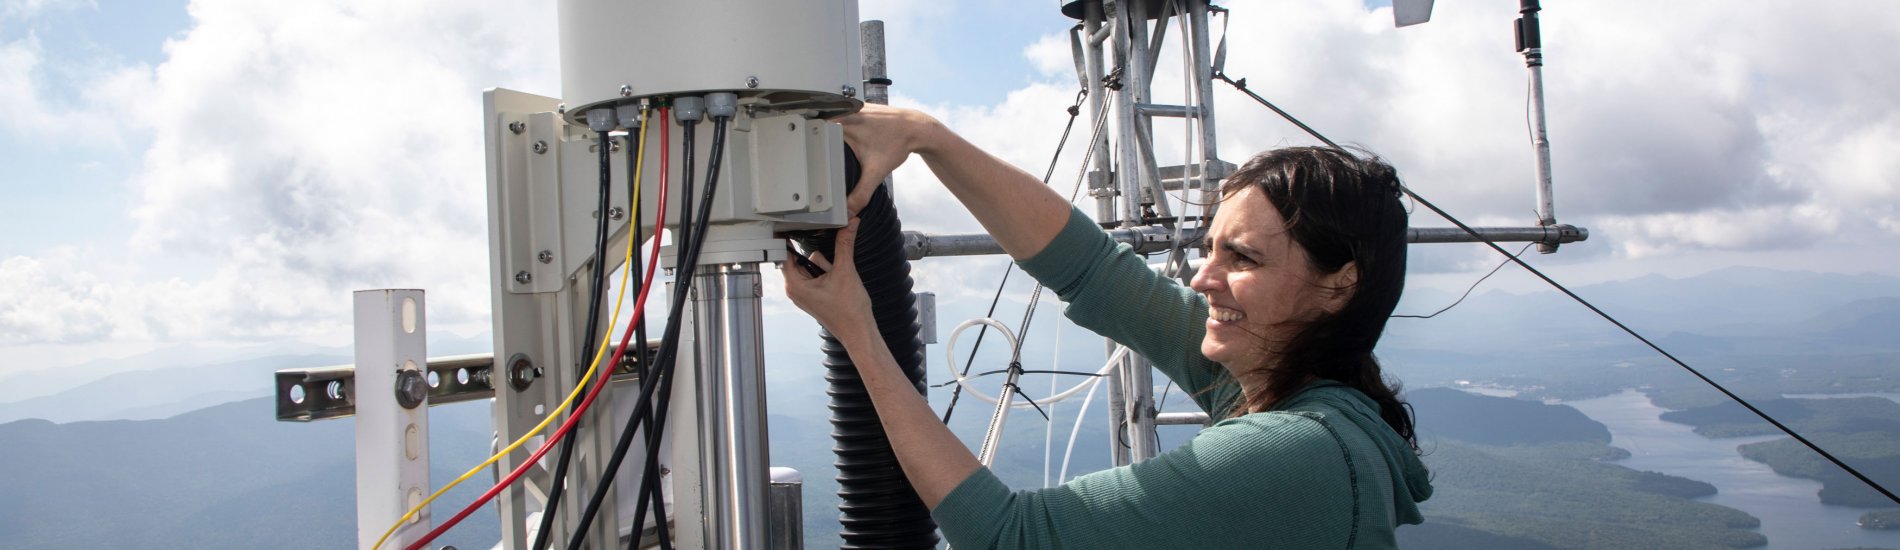 A researcher adjusts machinery for cloud water research on the summit of Whiteface Mountain